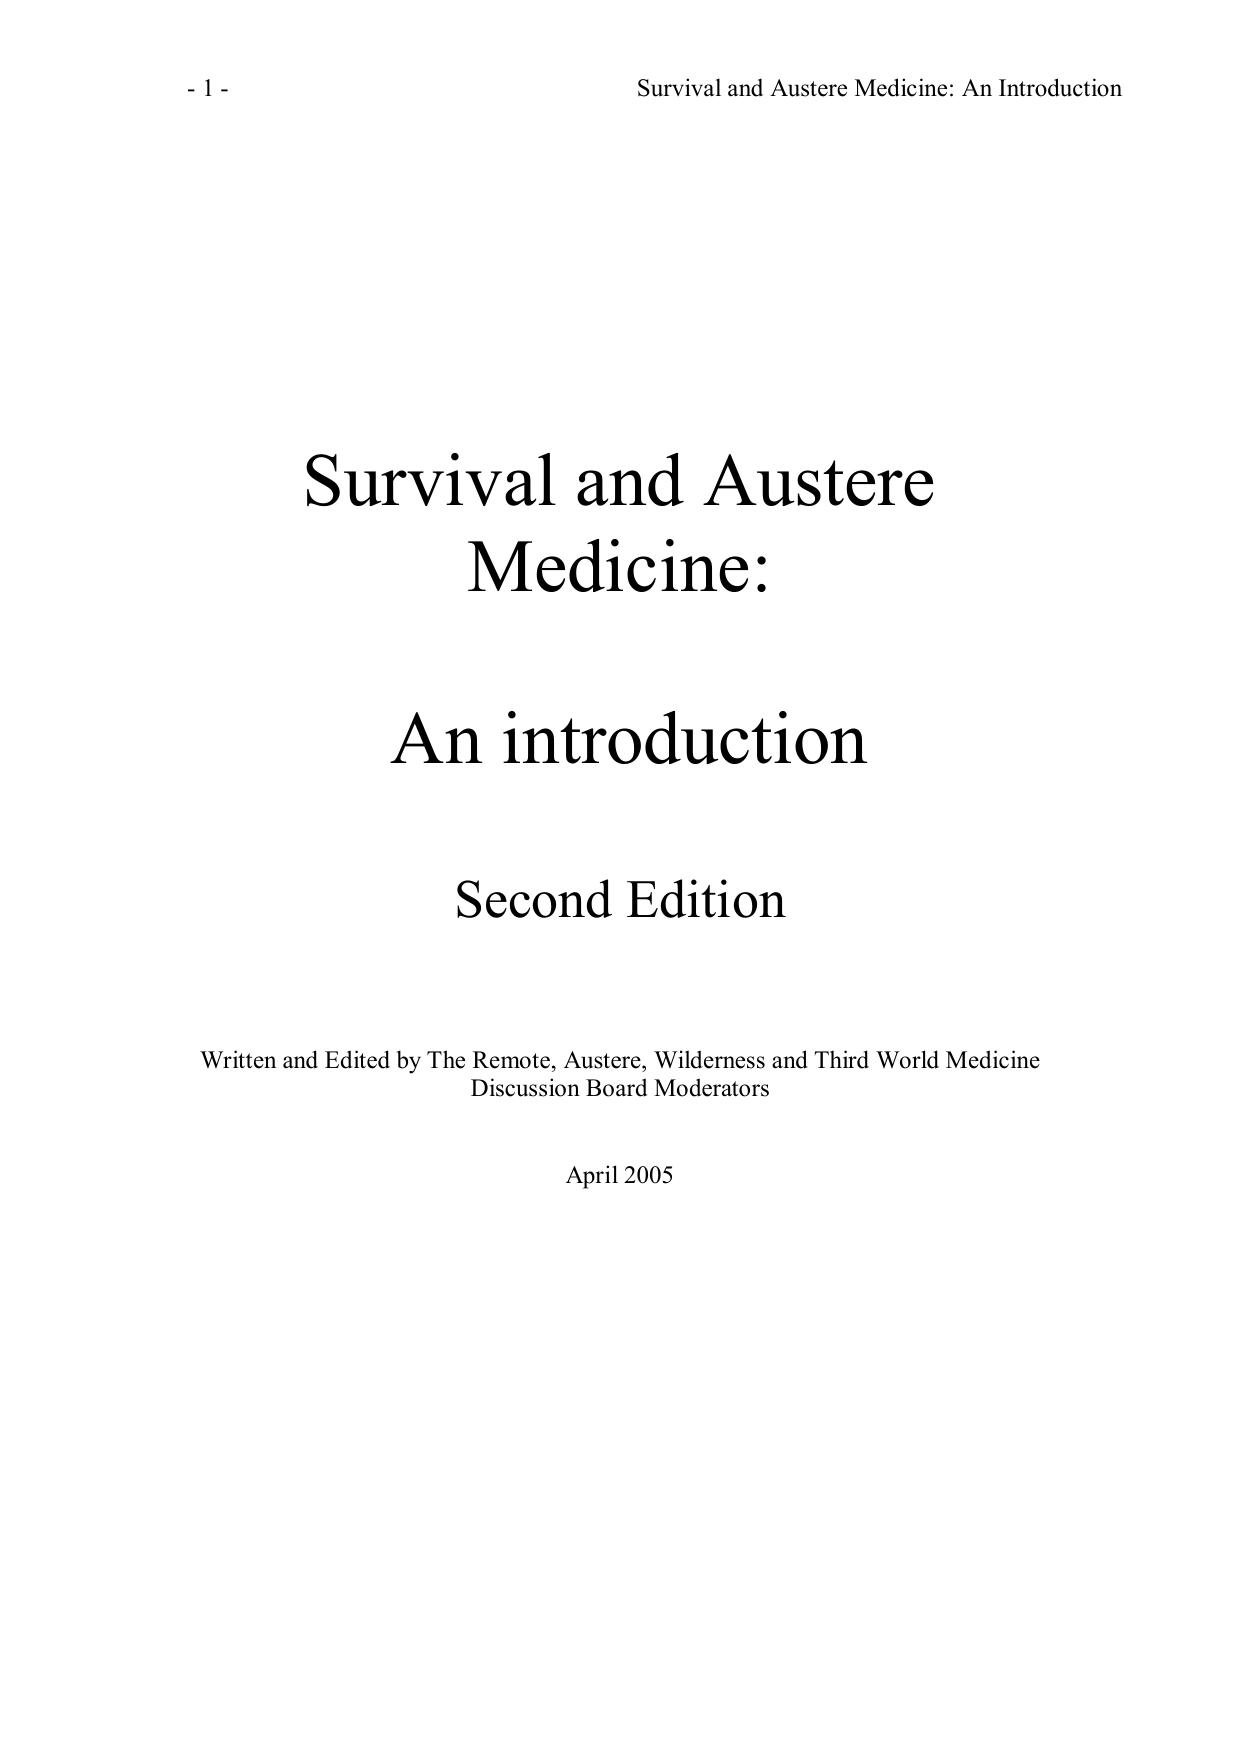 Survival and Austere Medicine by Various